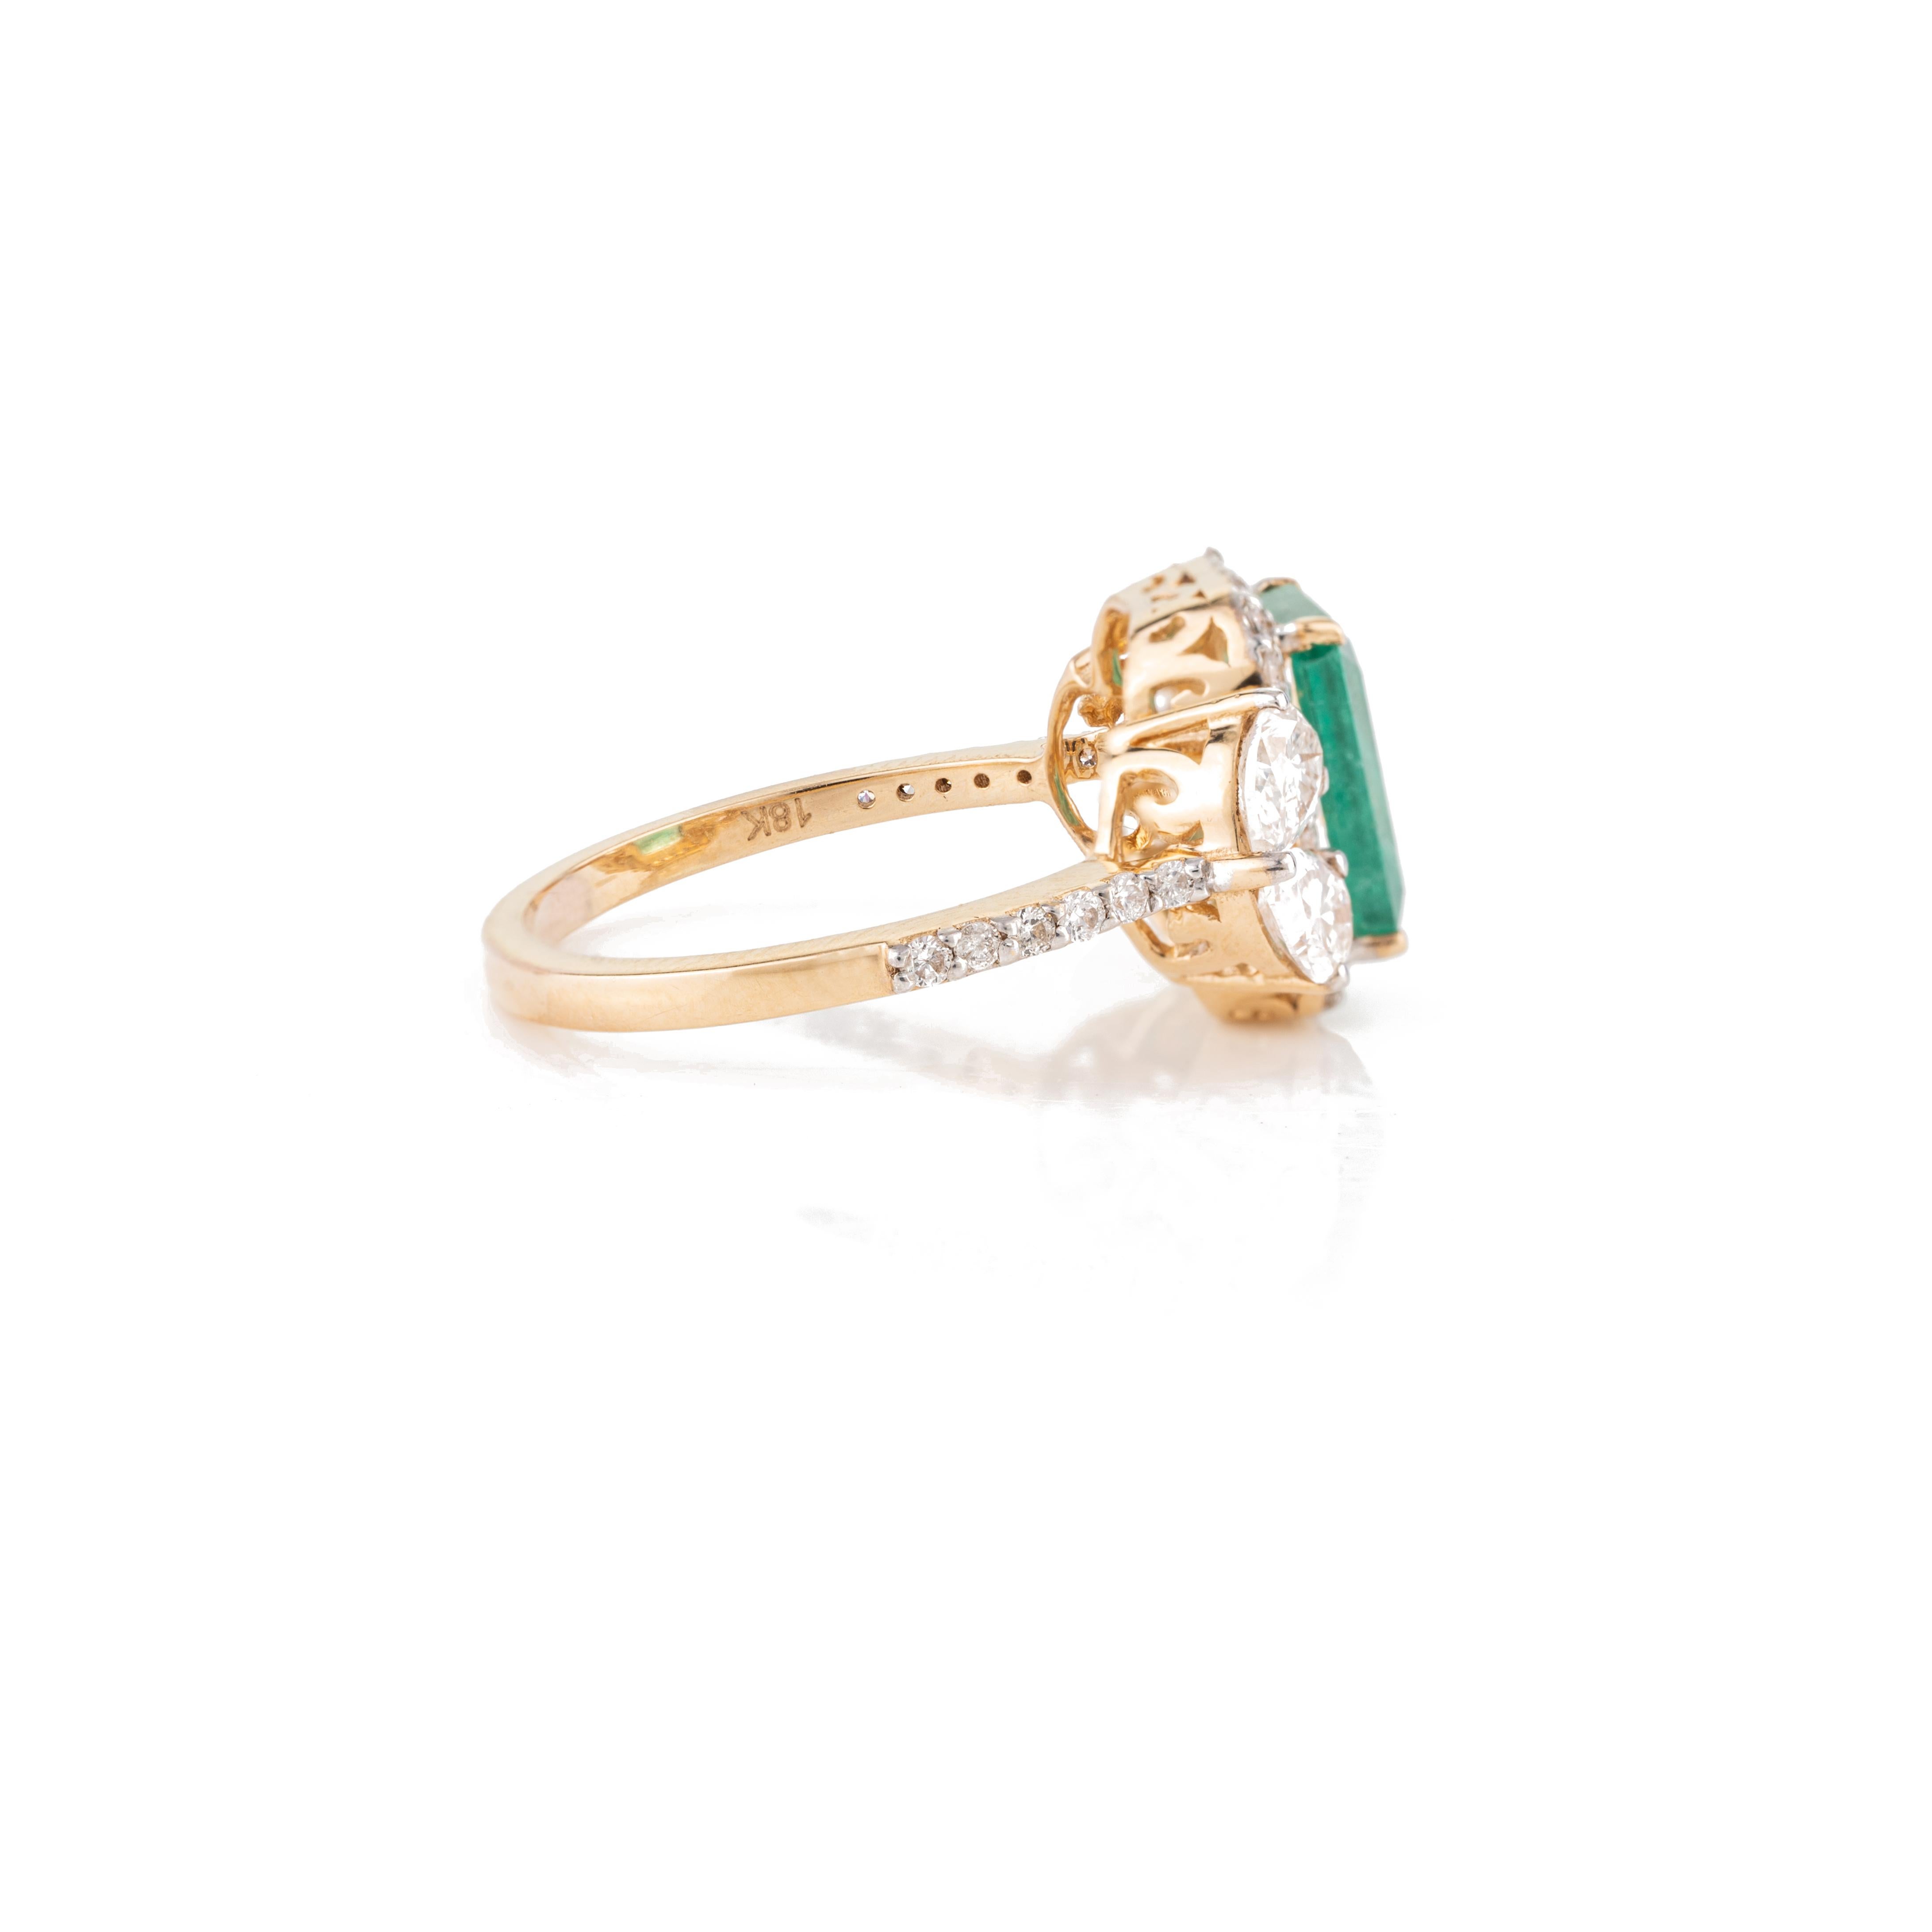 For Sale:  Designer Emerald Birthstone Diamond Big Cocktail Ring in 18k Solid Yellow Gold 4